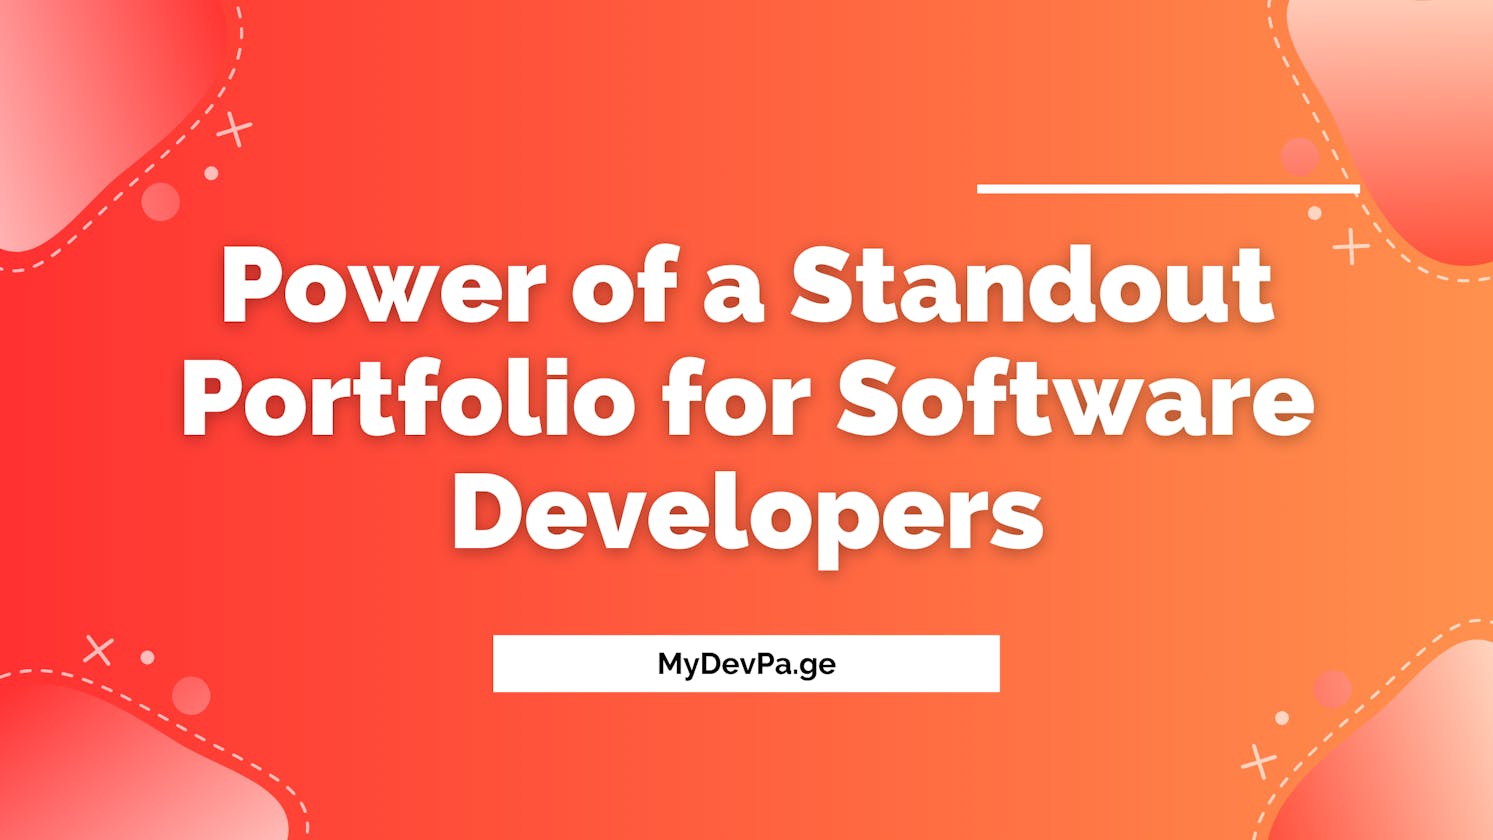 The Power of a Standout Portfolio for Software Developers